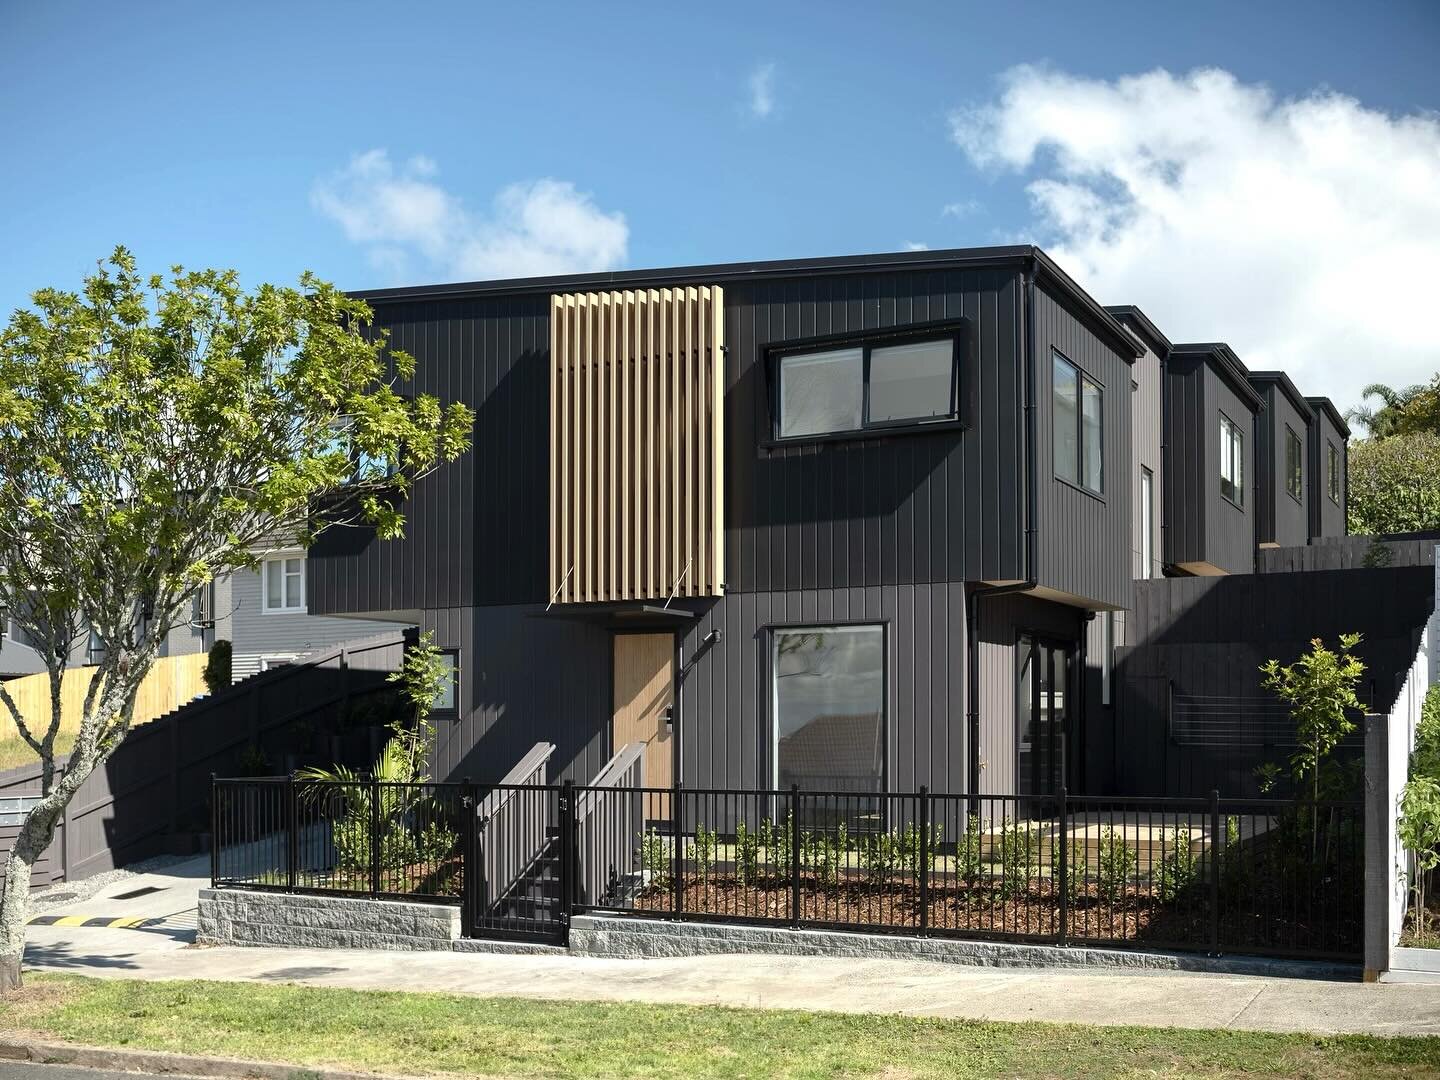 Completed Project | Crossfields by Lighthouse, 26 Leybourne Circle, Glen Innes, Auckland.
Four thoughtfully crafted three-bedroom homes connected to culture, inspired by location and landscape. This project sold out prior to completion, and we were d